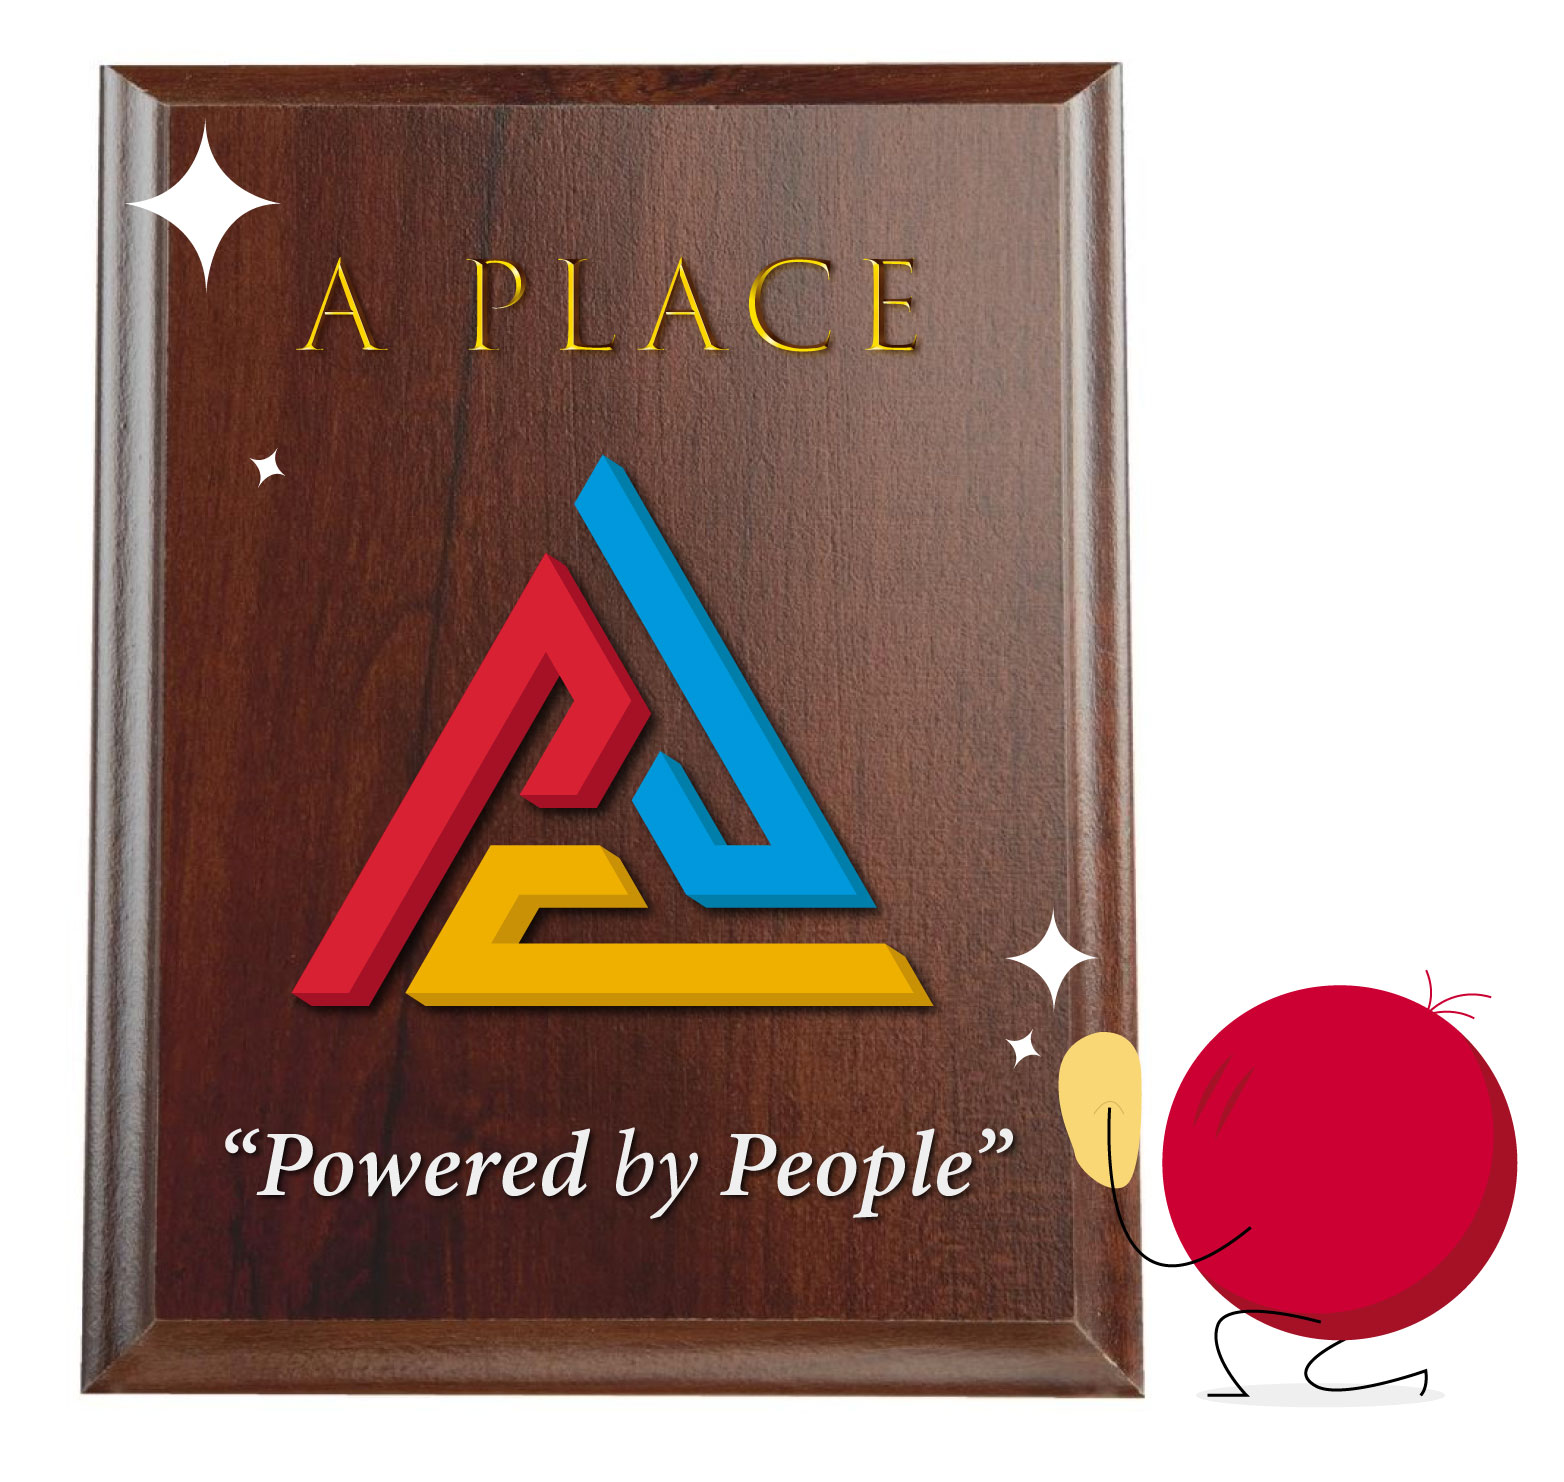 illustration of company plaque with words "Powered By People"